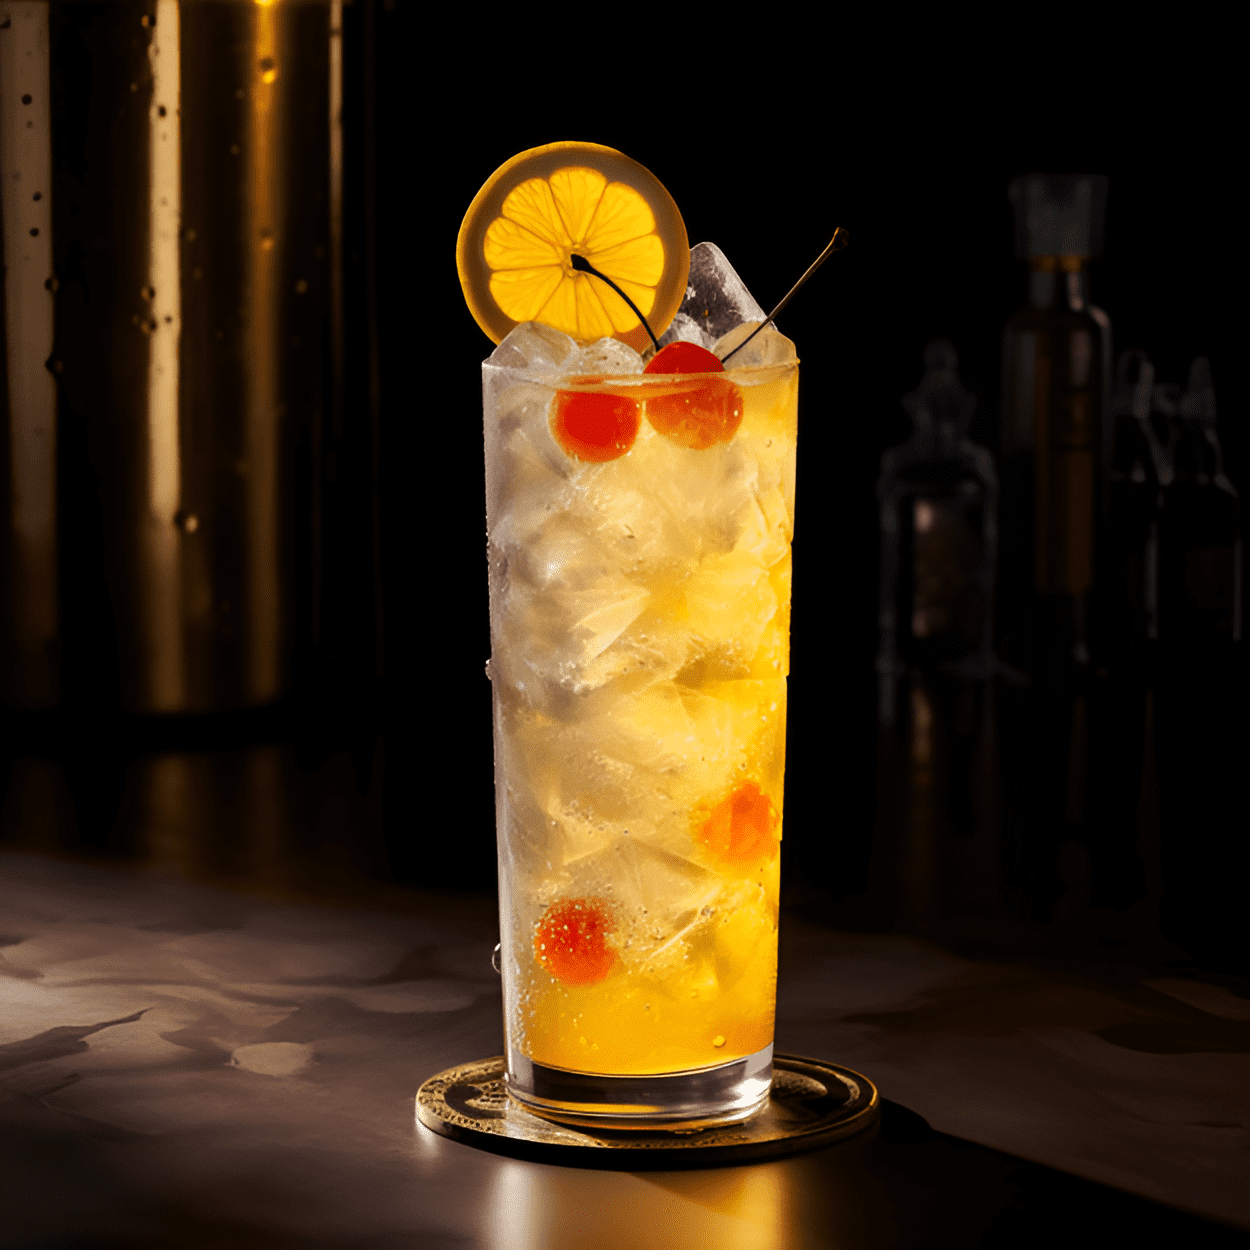 Mojo Cocktail Recipe - The Mojo cocktail is a delightful blend of tangy, sweet, and spicy flavors. The citrusy notes from the lemon and orange are perfectly balanced with the sweetness of the honey, while the chili flakes add a subtle heat that lingers on the palate.